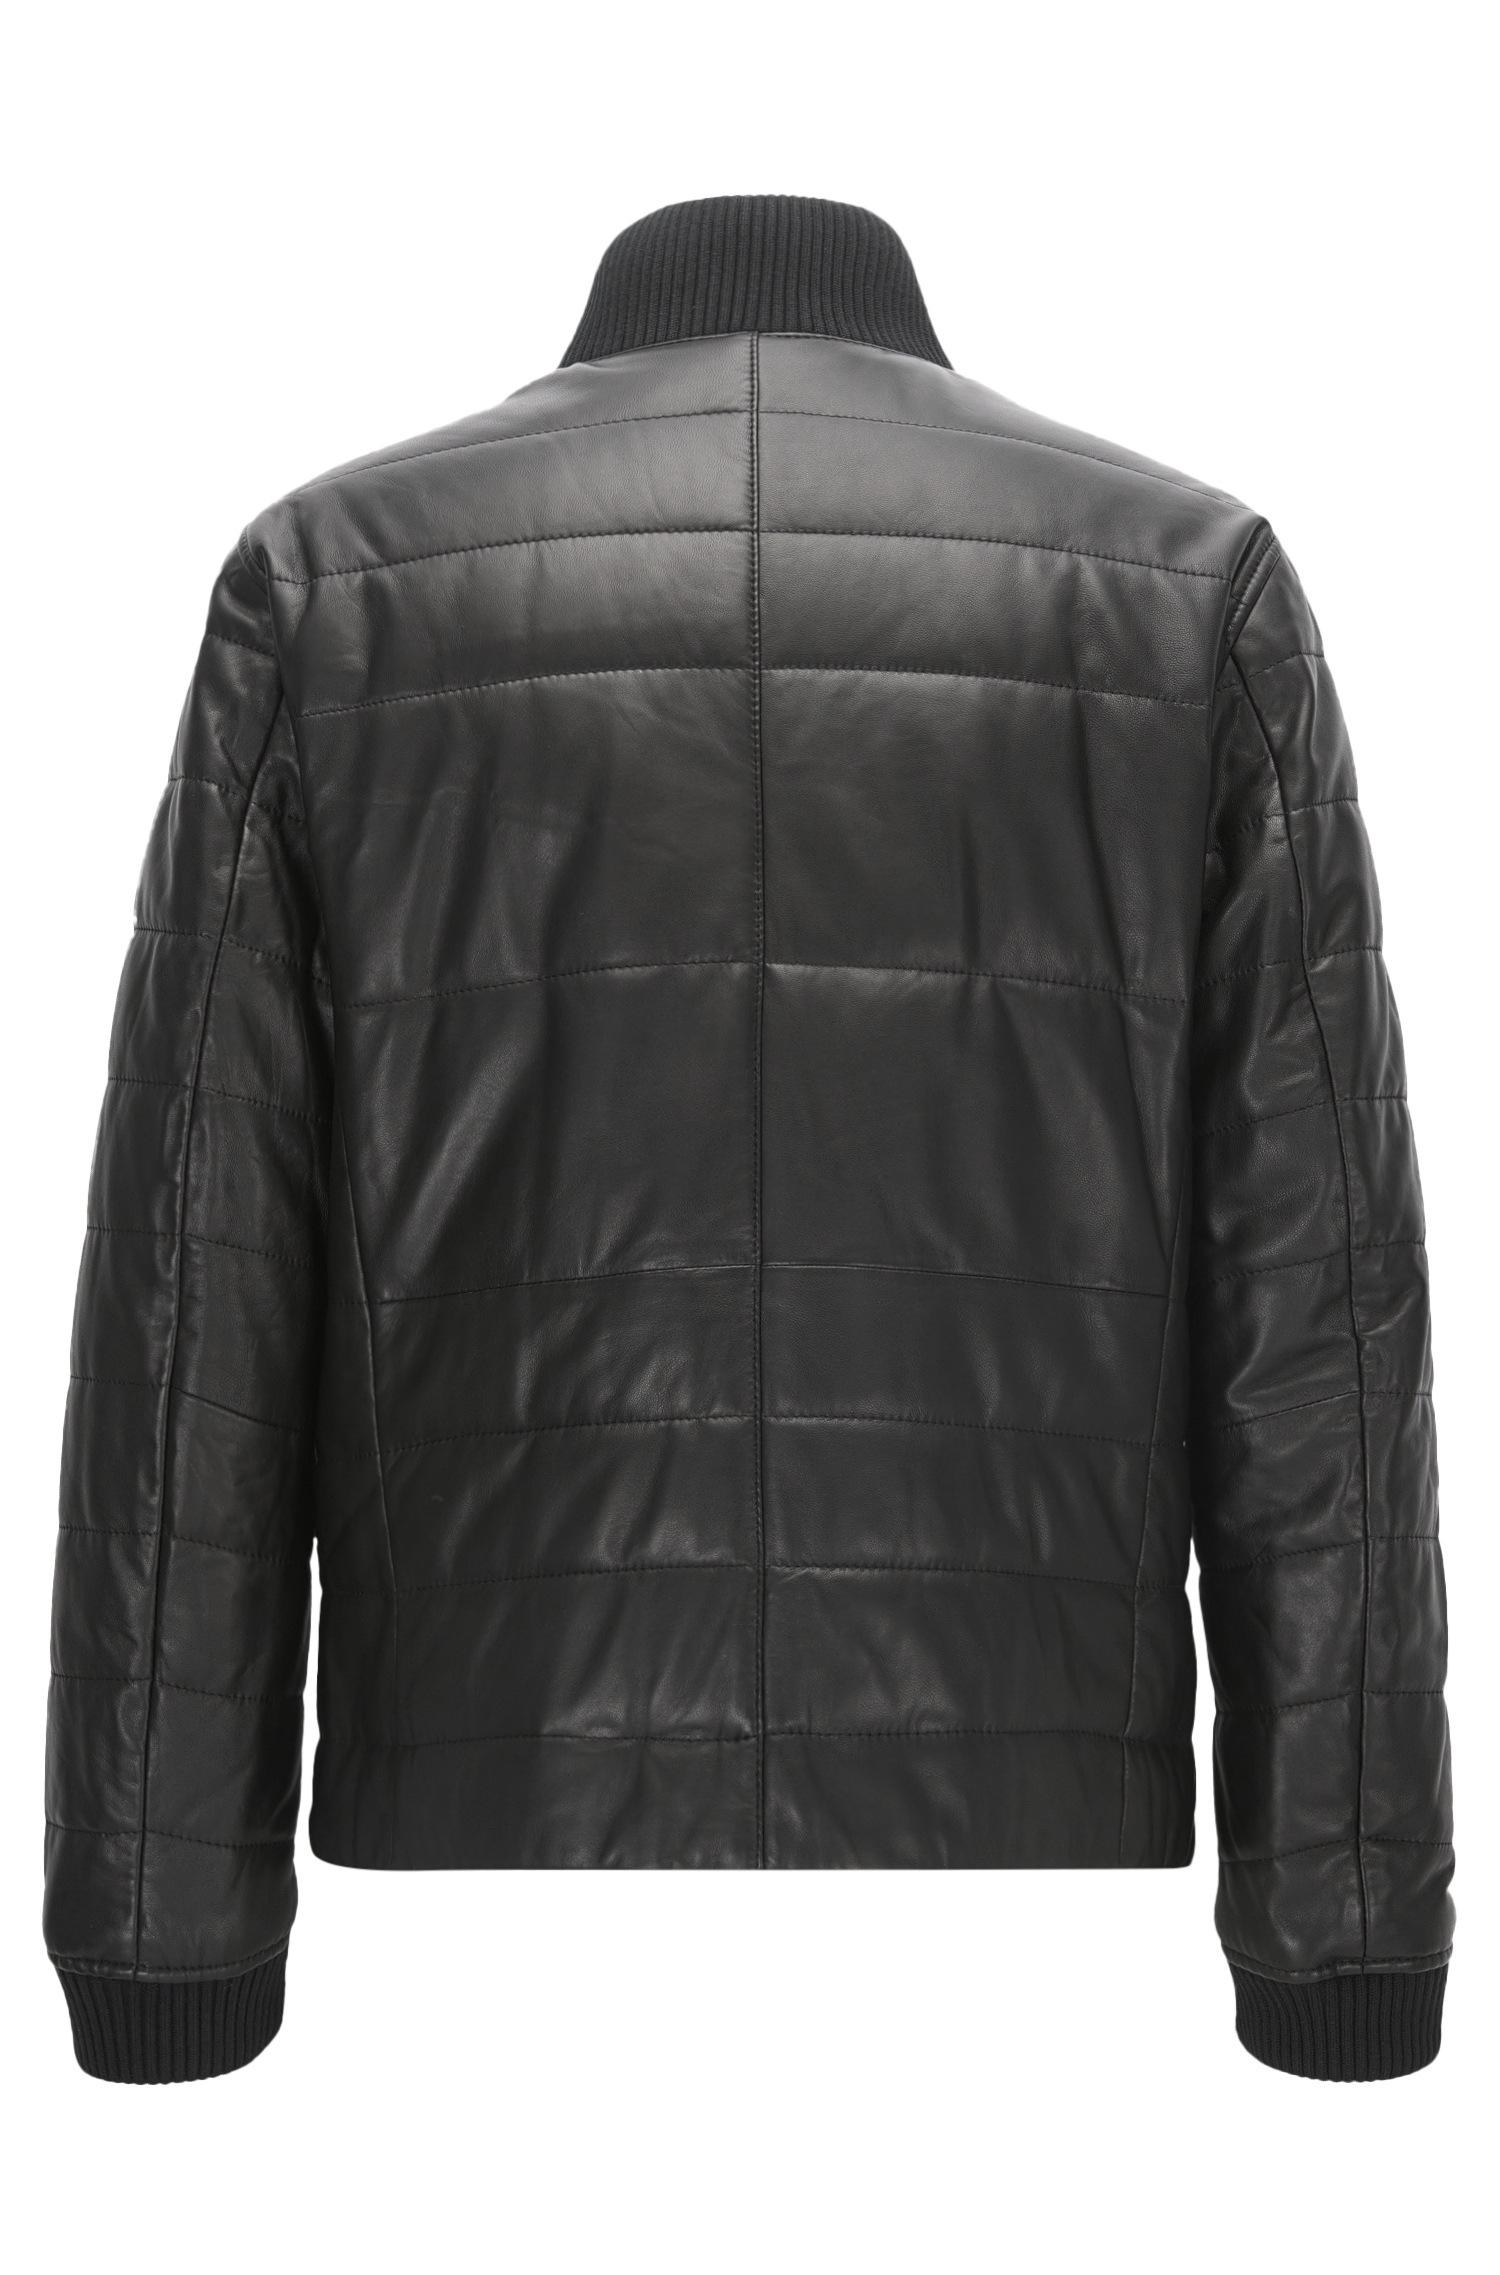 boss athleisure quilted jacket